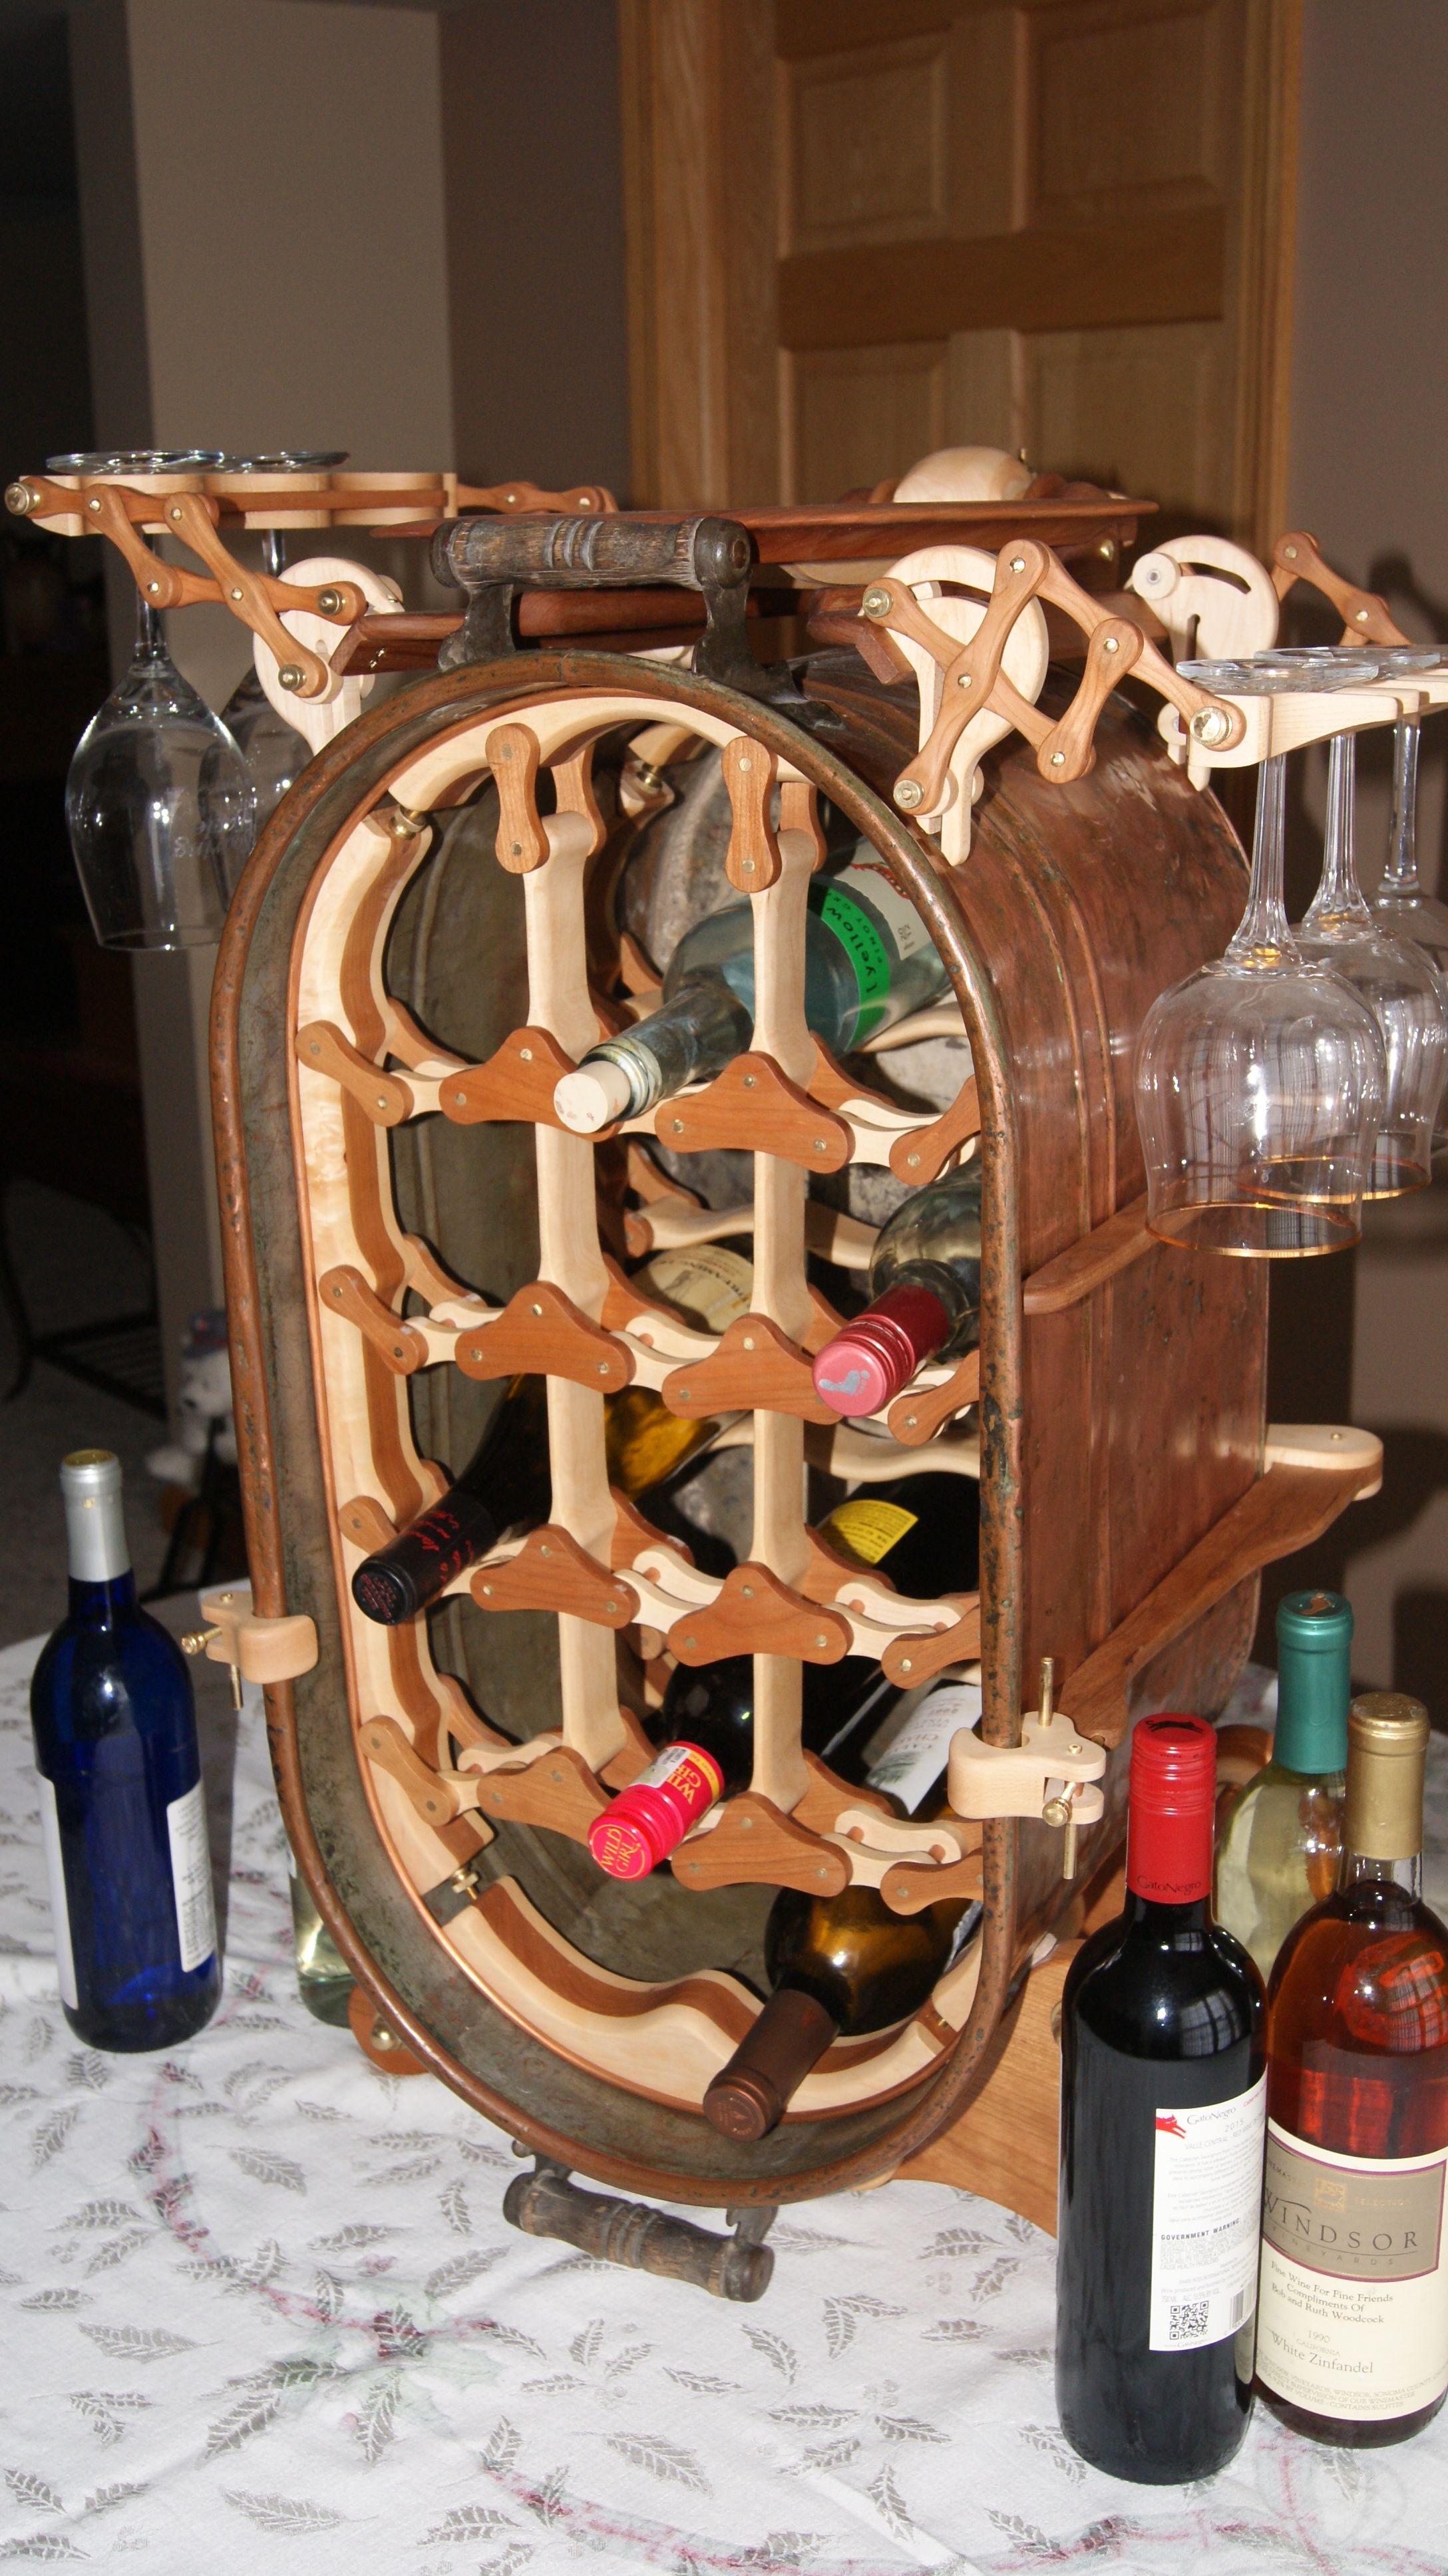 Buy Custom Wine Rack, World's Most Unique!, made to order from Michael